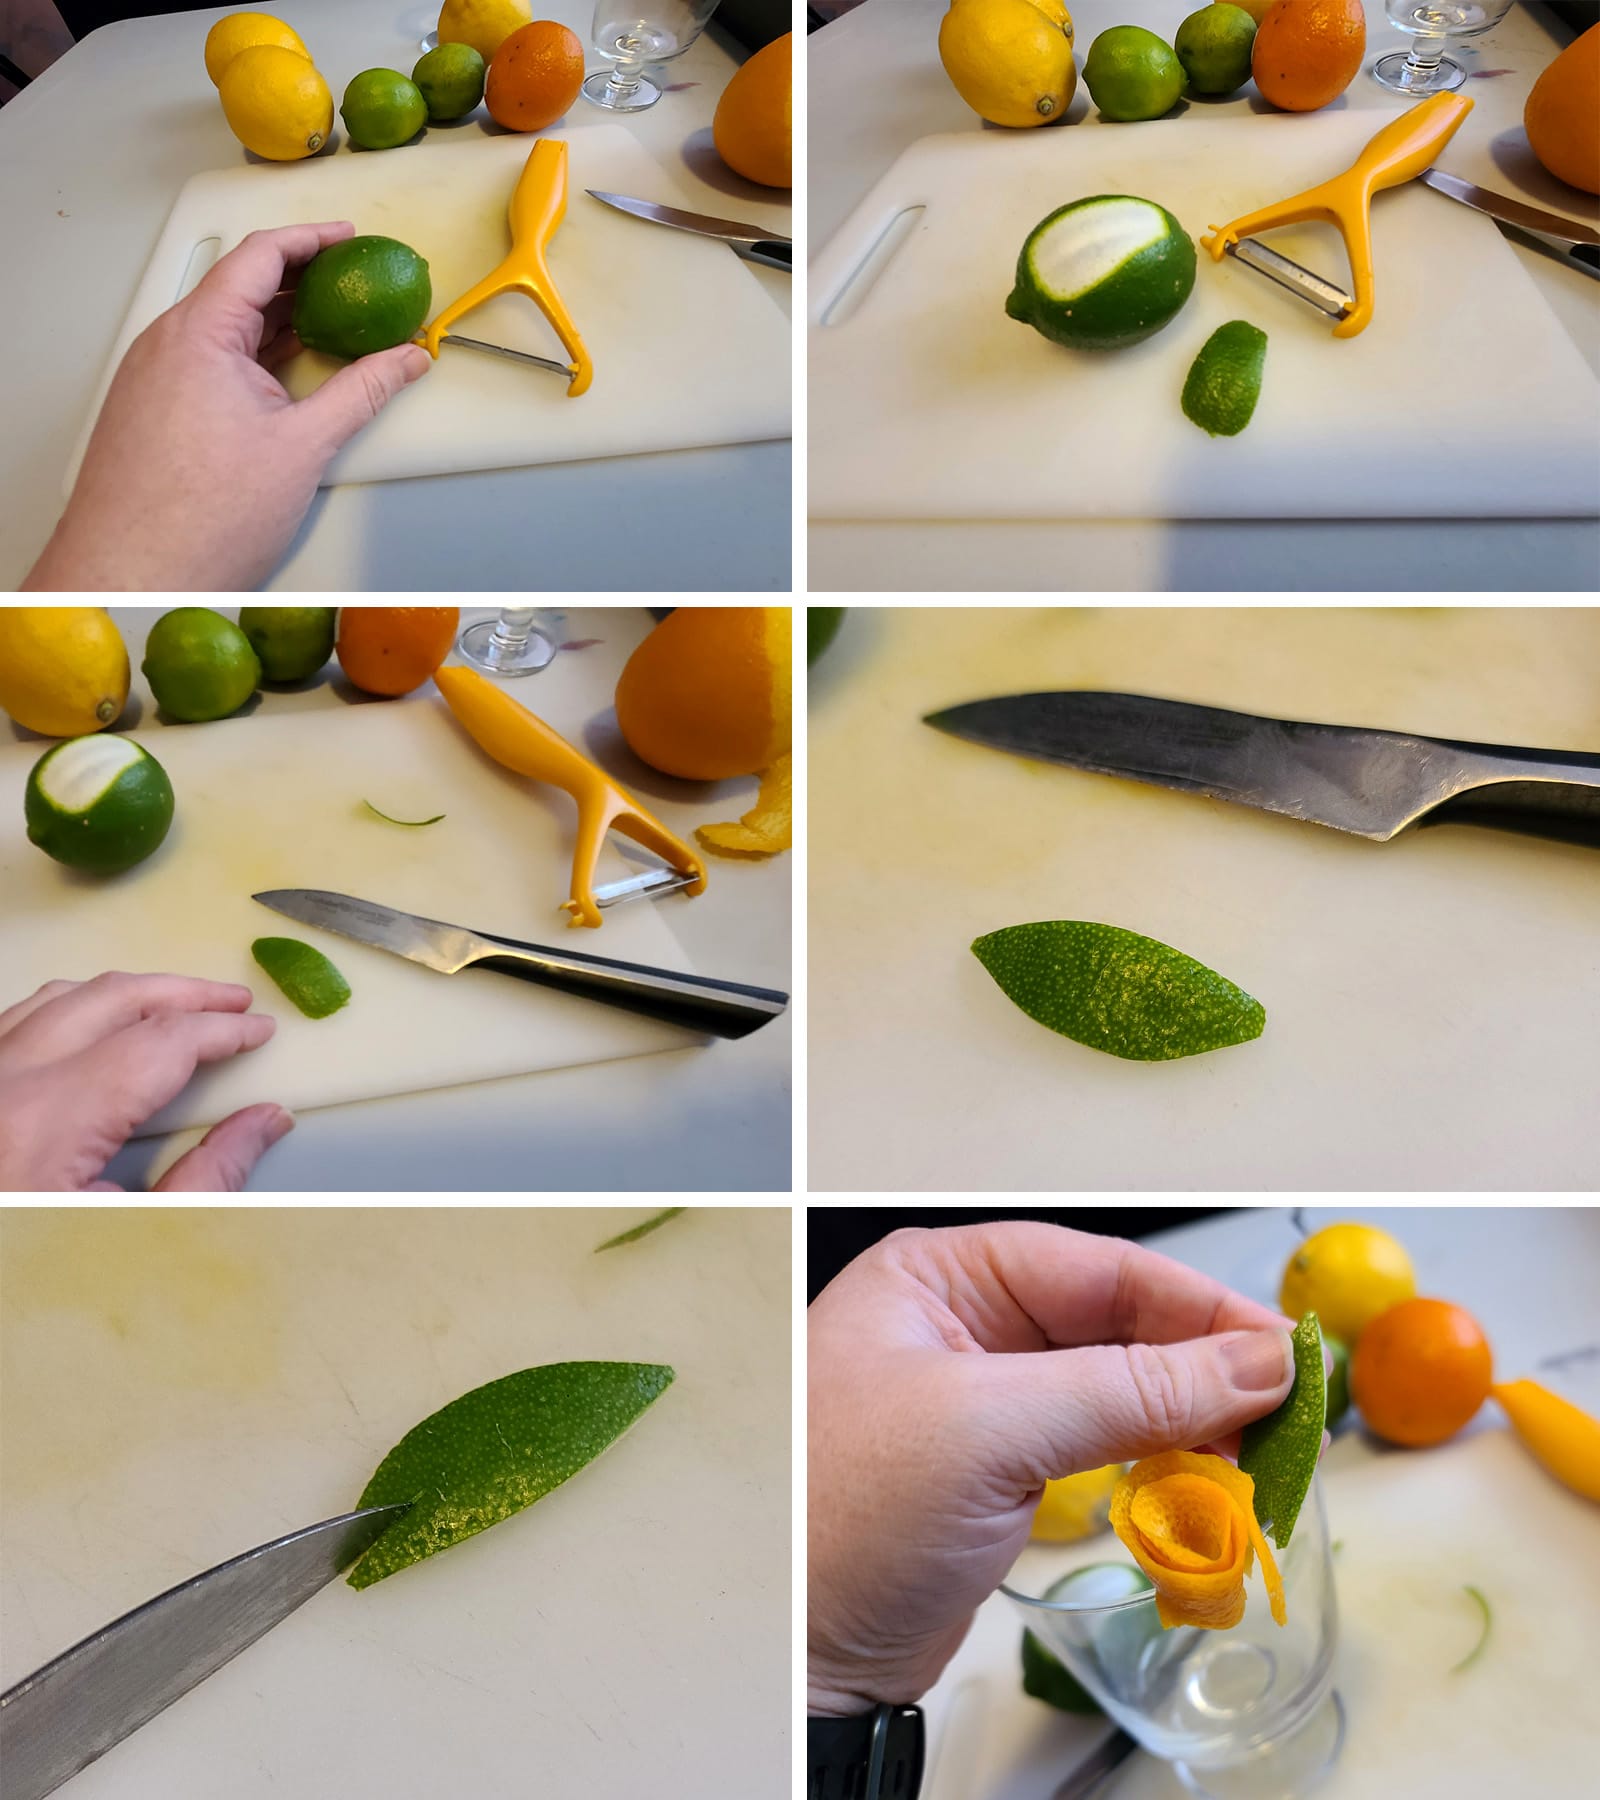 A 6 part compilation image showing a leaf being cut from a lime peel.